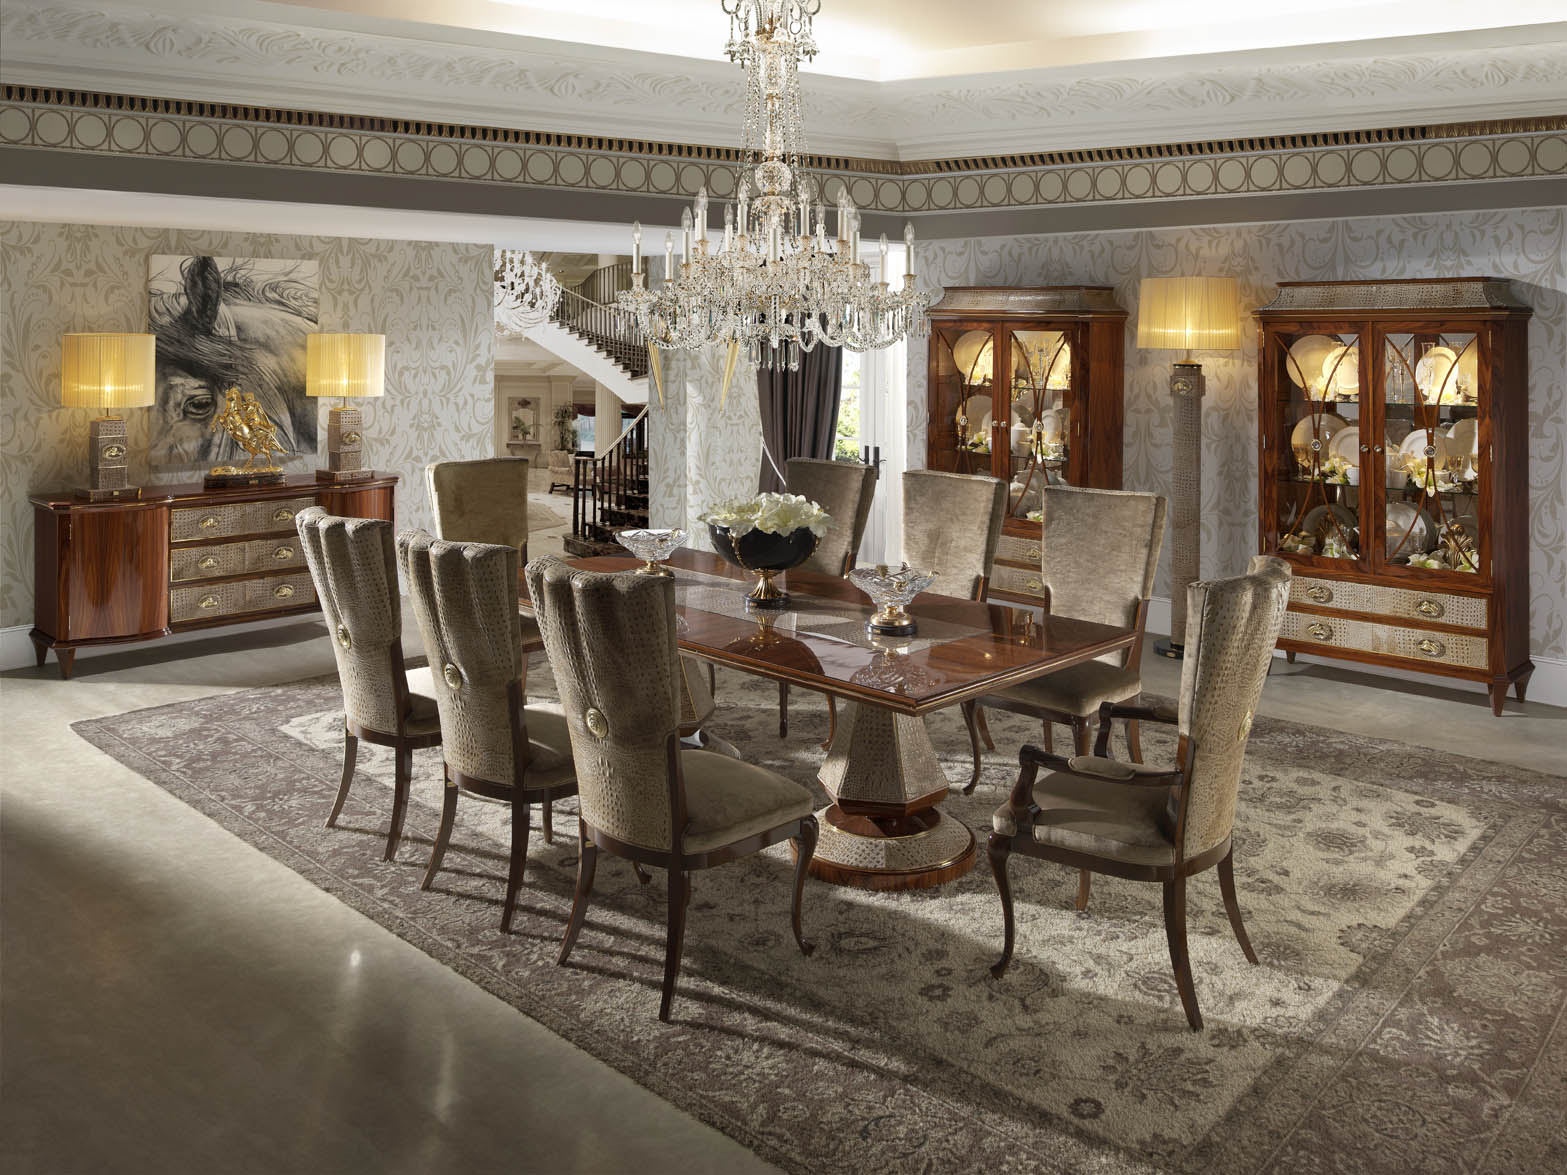 The EQUUS dining room